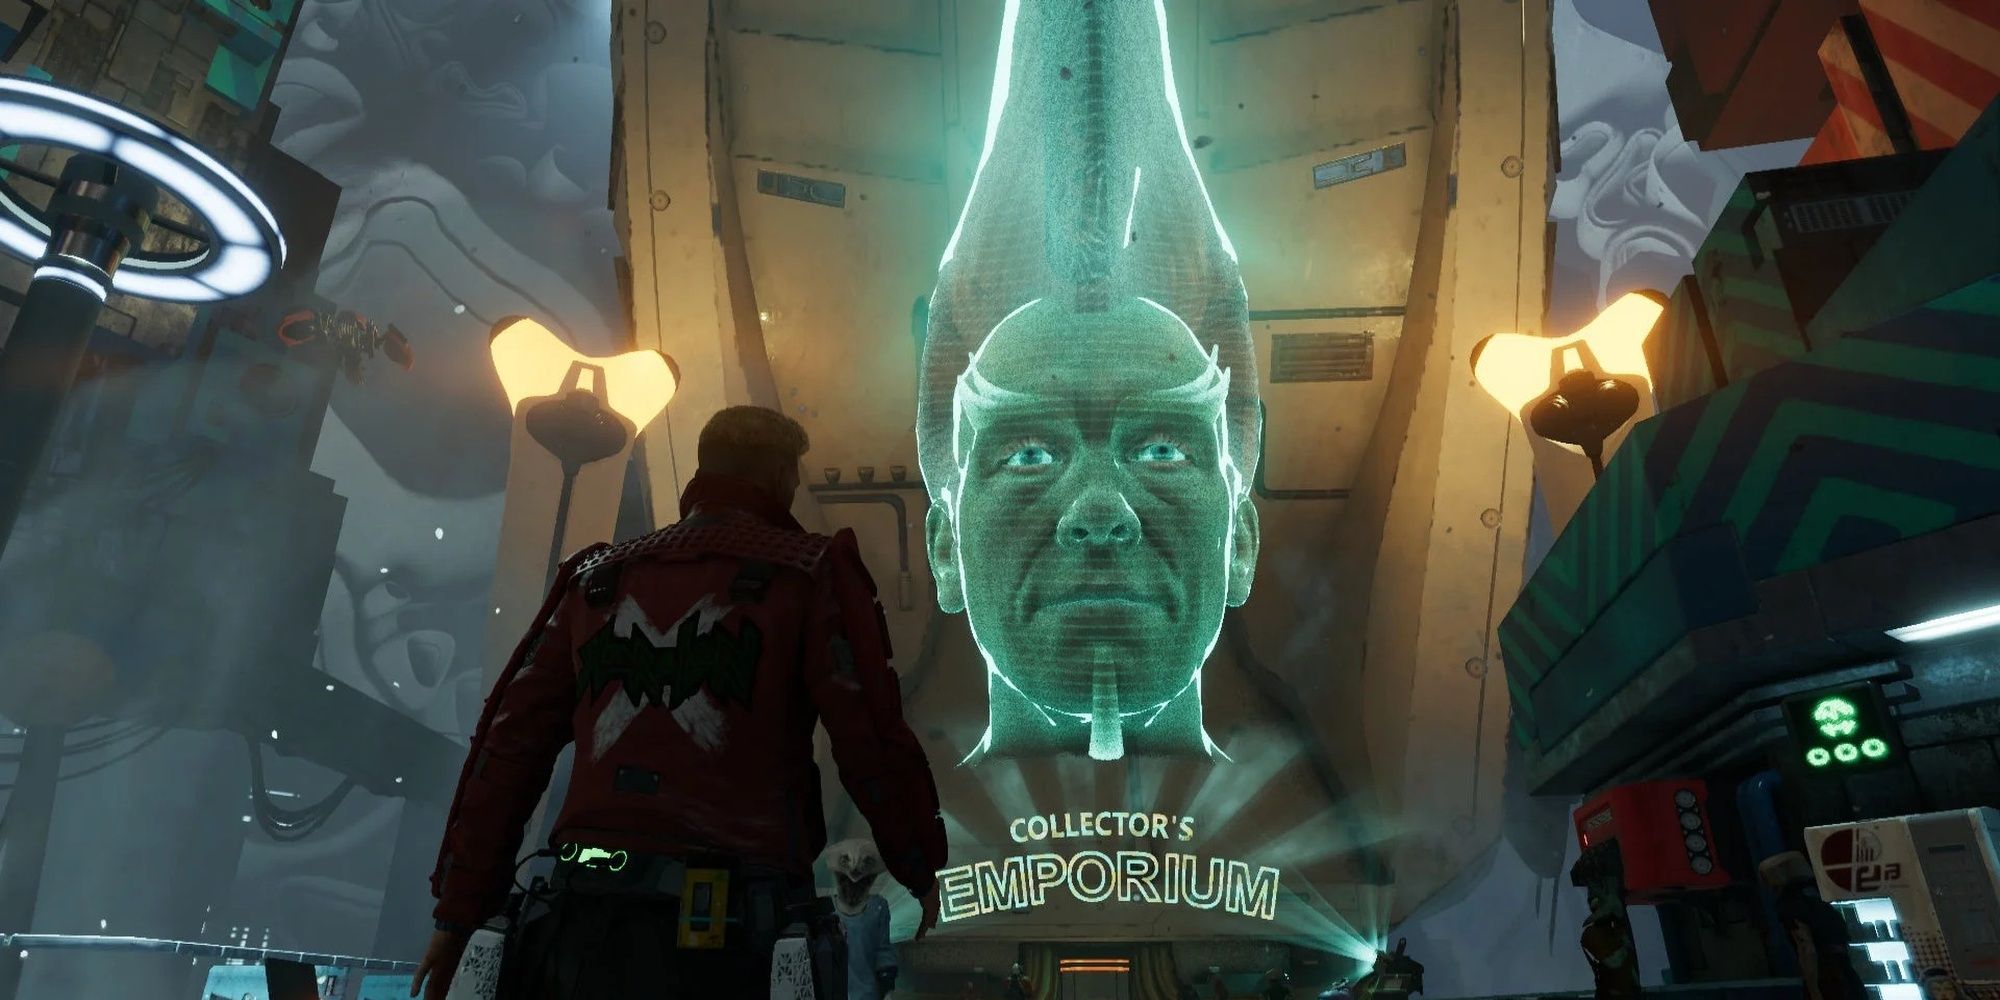 The Collector's Emporium, featured in Marvel's Guardians of the Galaxy